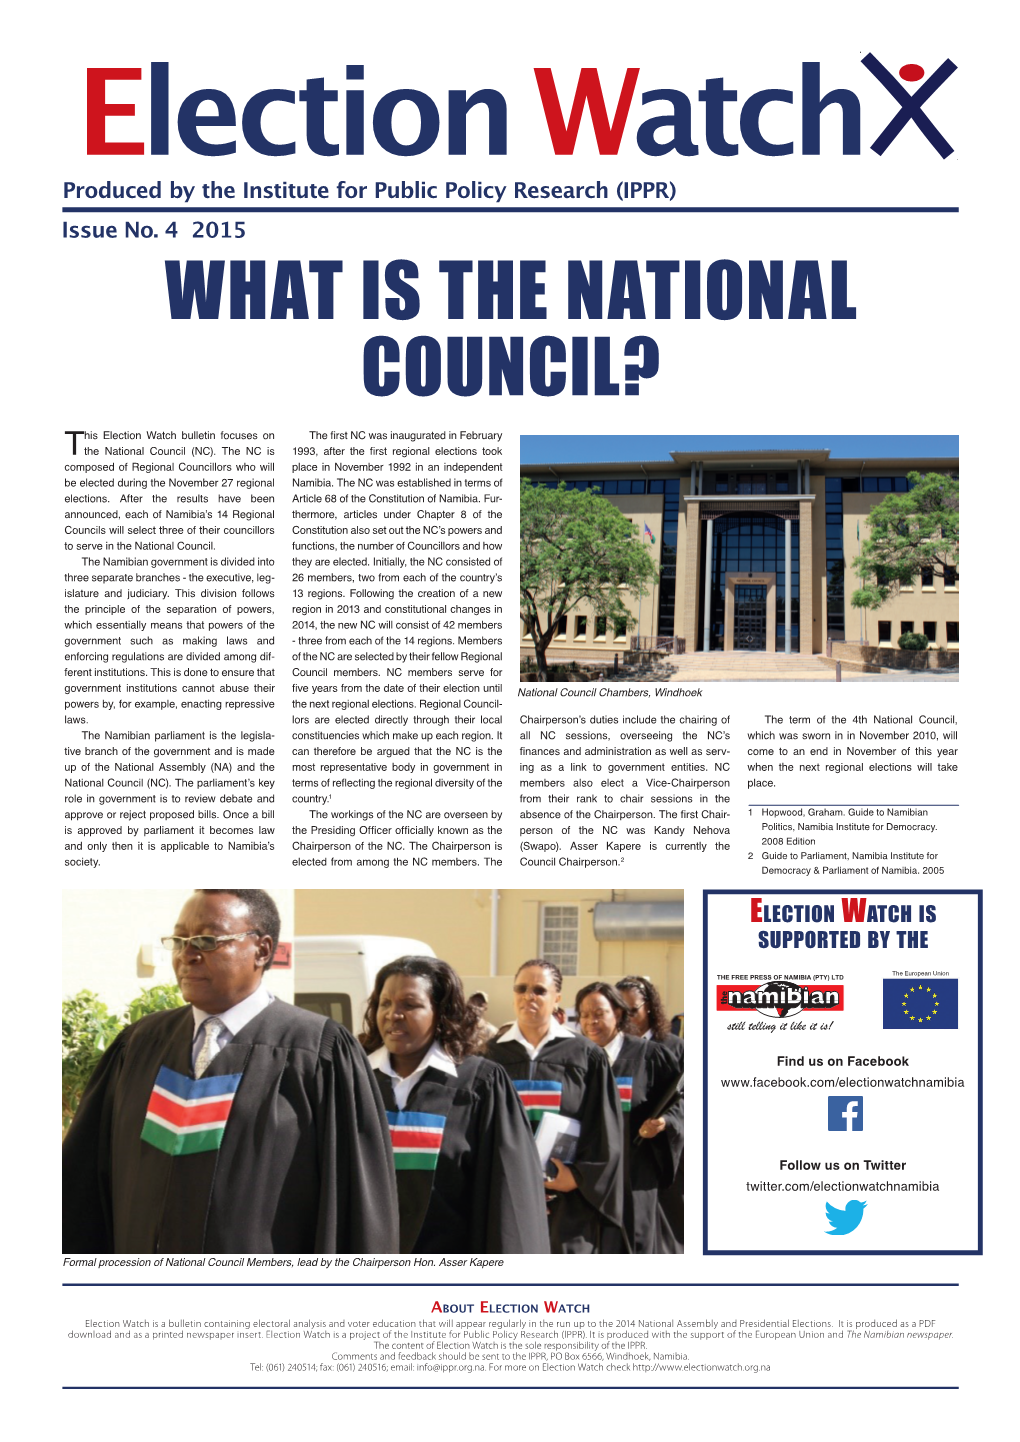 What Is the National Council?